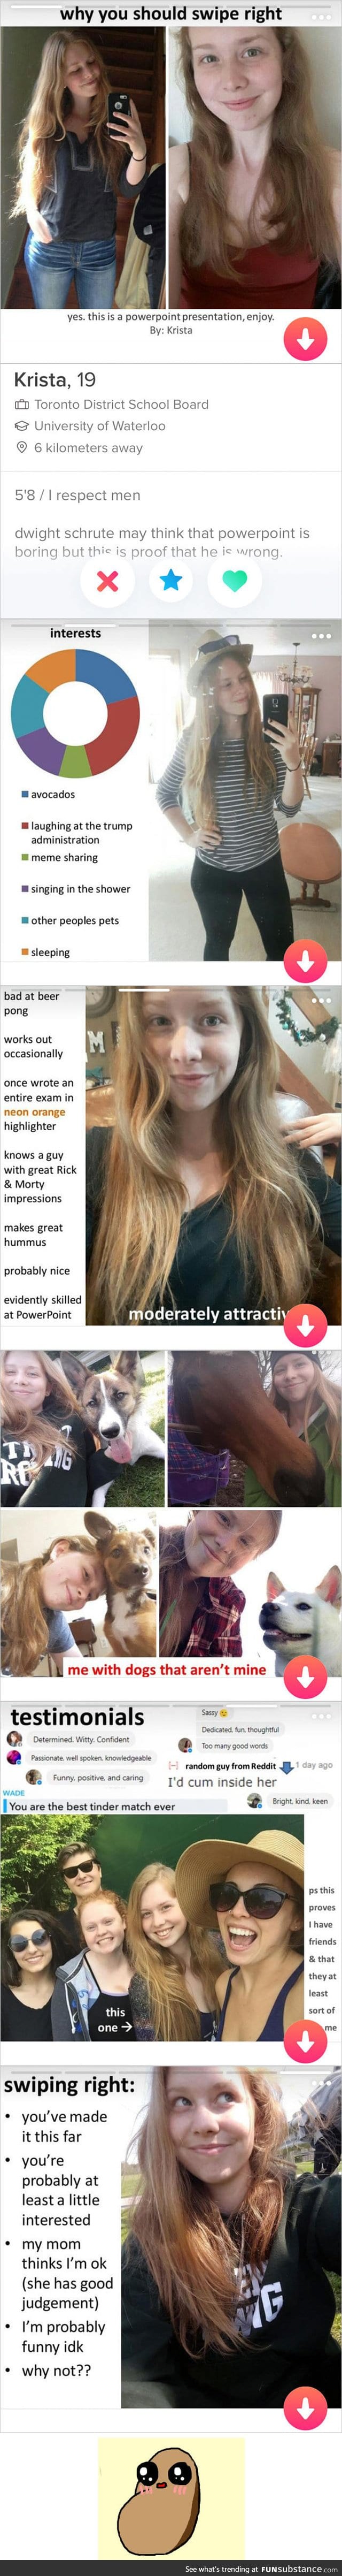 Girl turned her tinder profile into a powerpoint